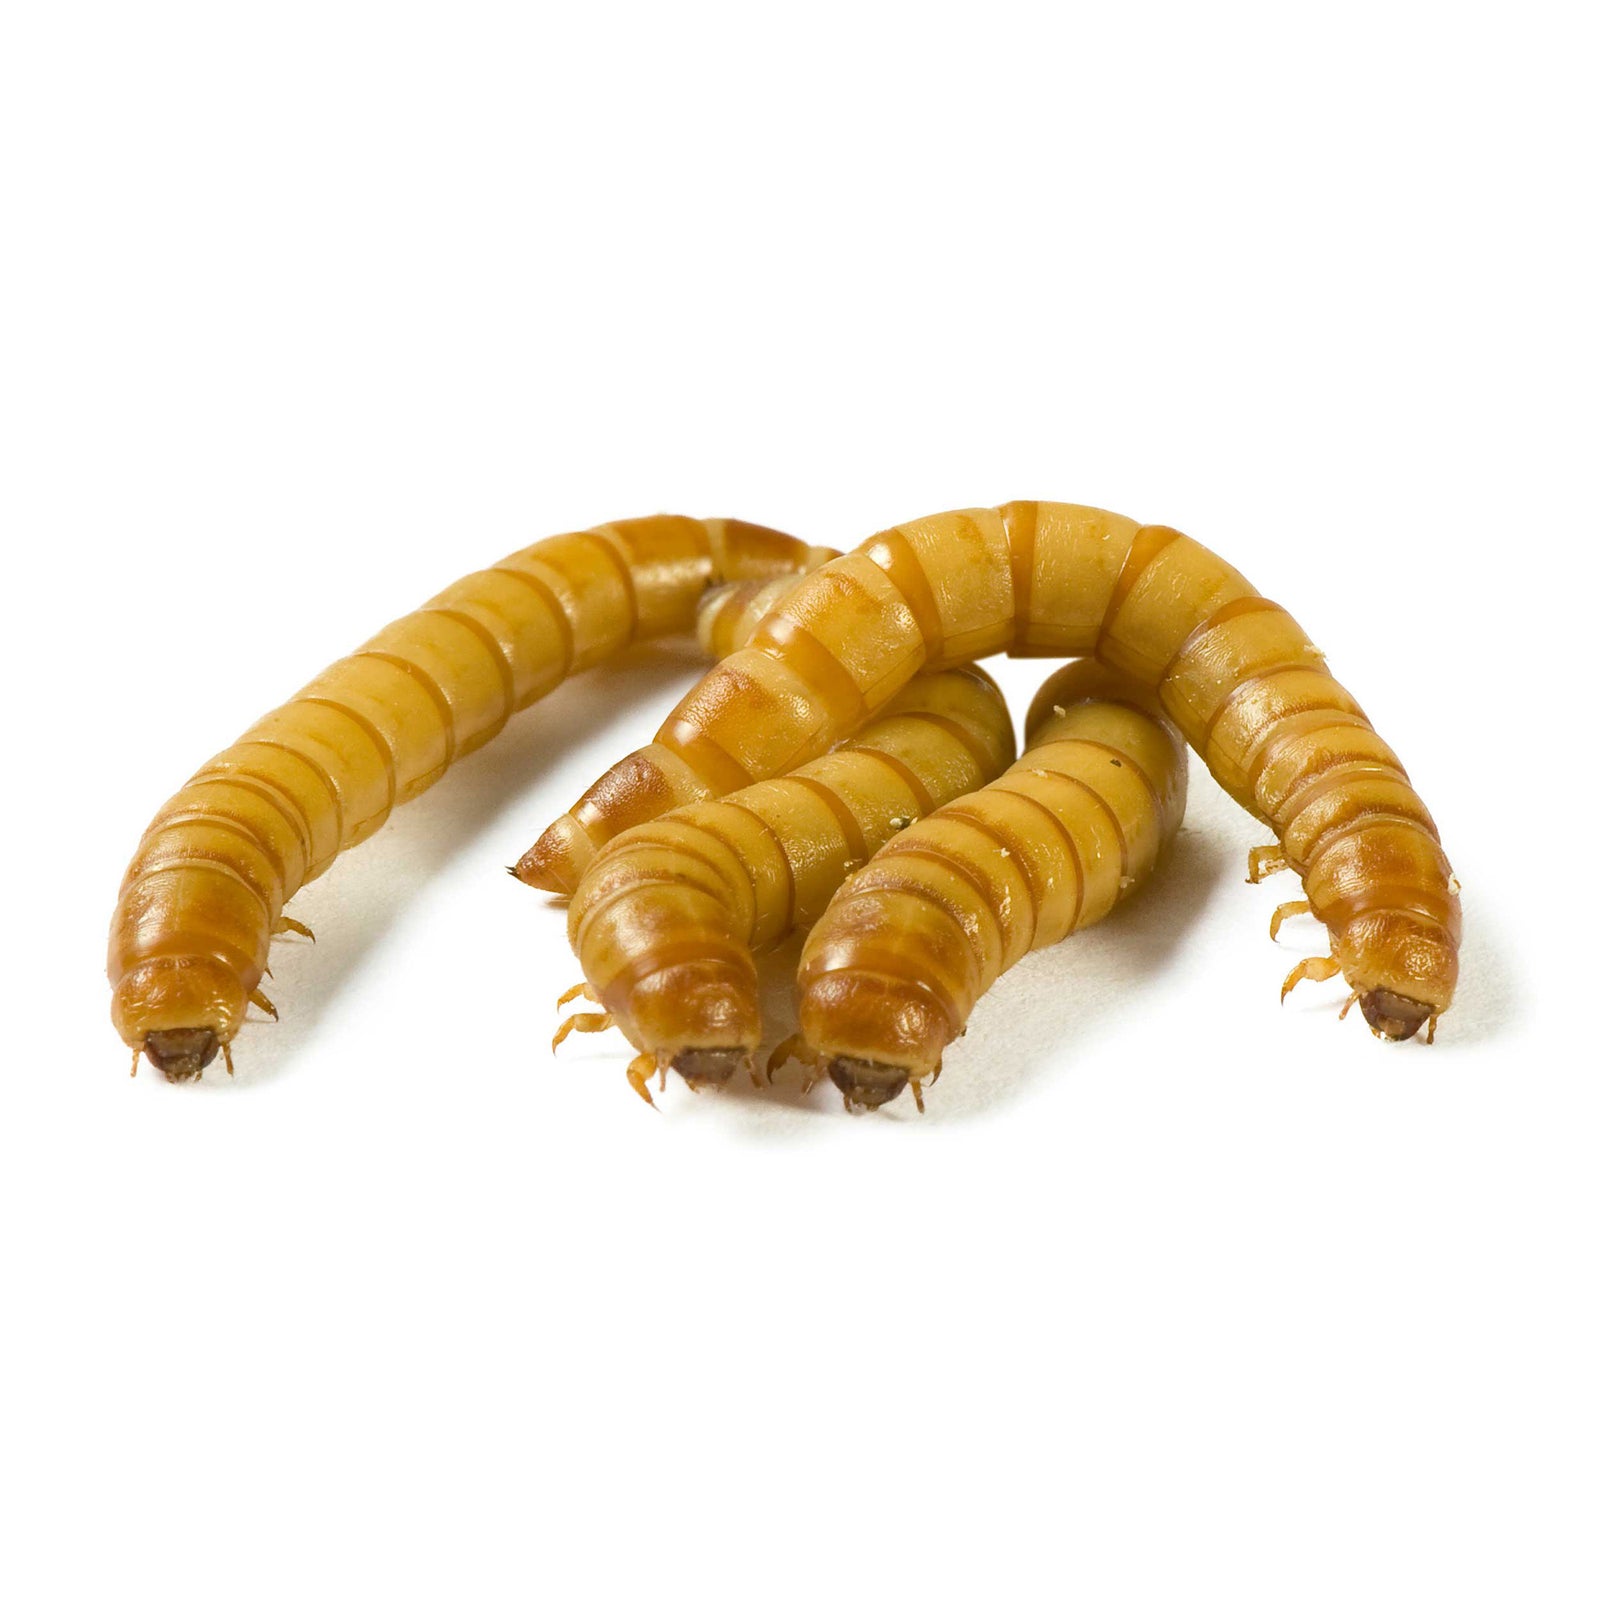 Live Wax Worms for Sale, Buy Wax Worms